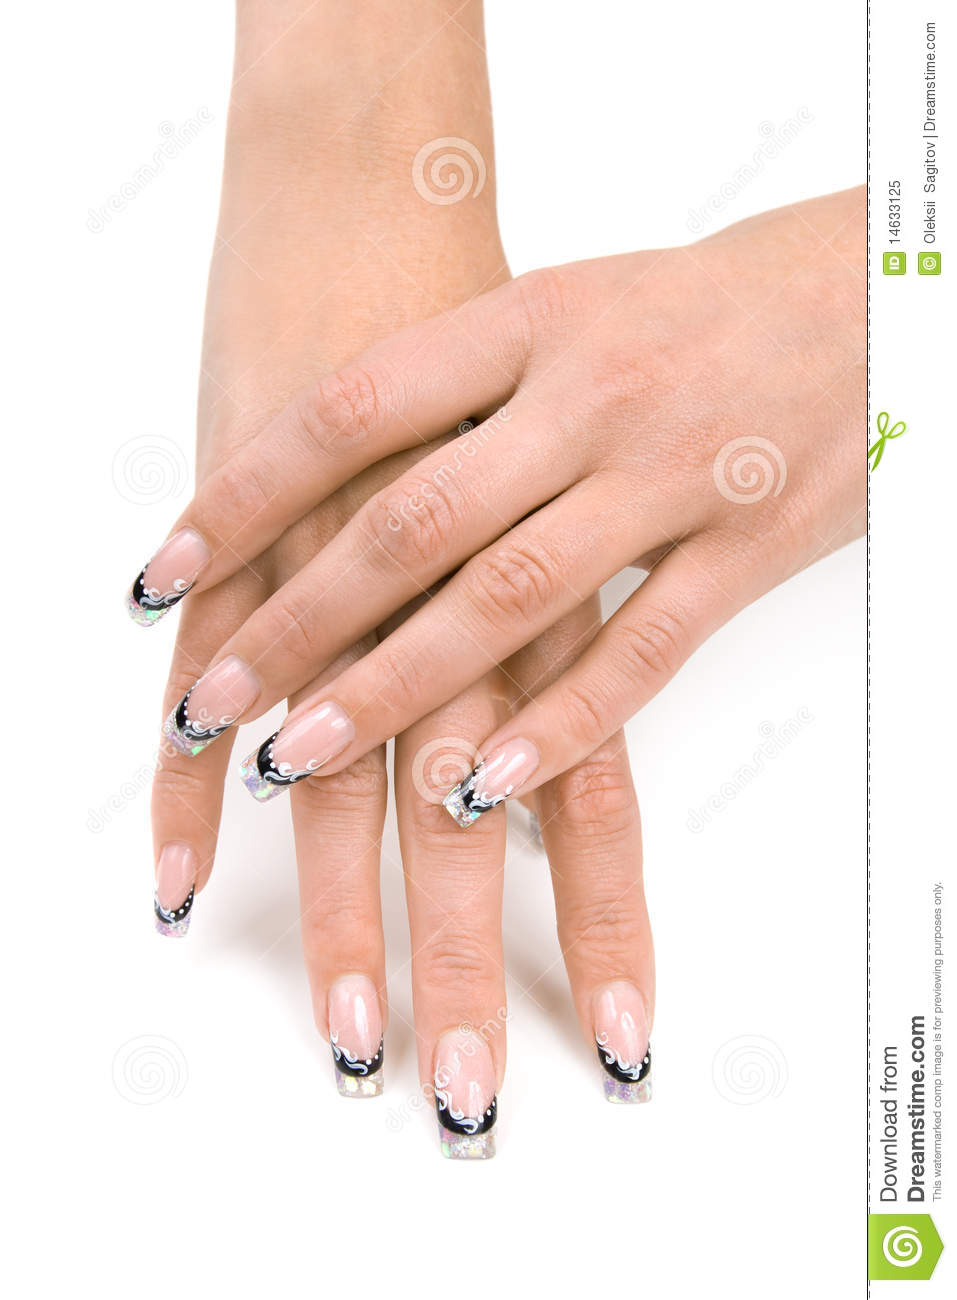 Women S Hands With A Nice Manicure  Royalty Free Stock Photo   Image